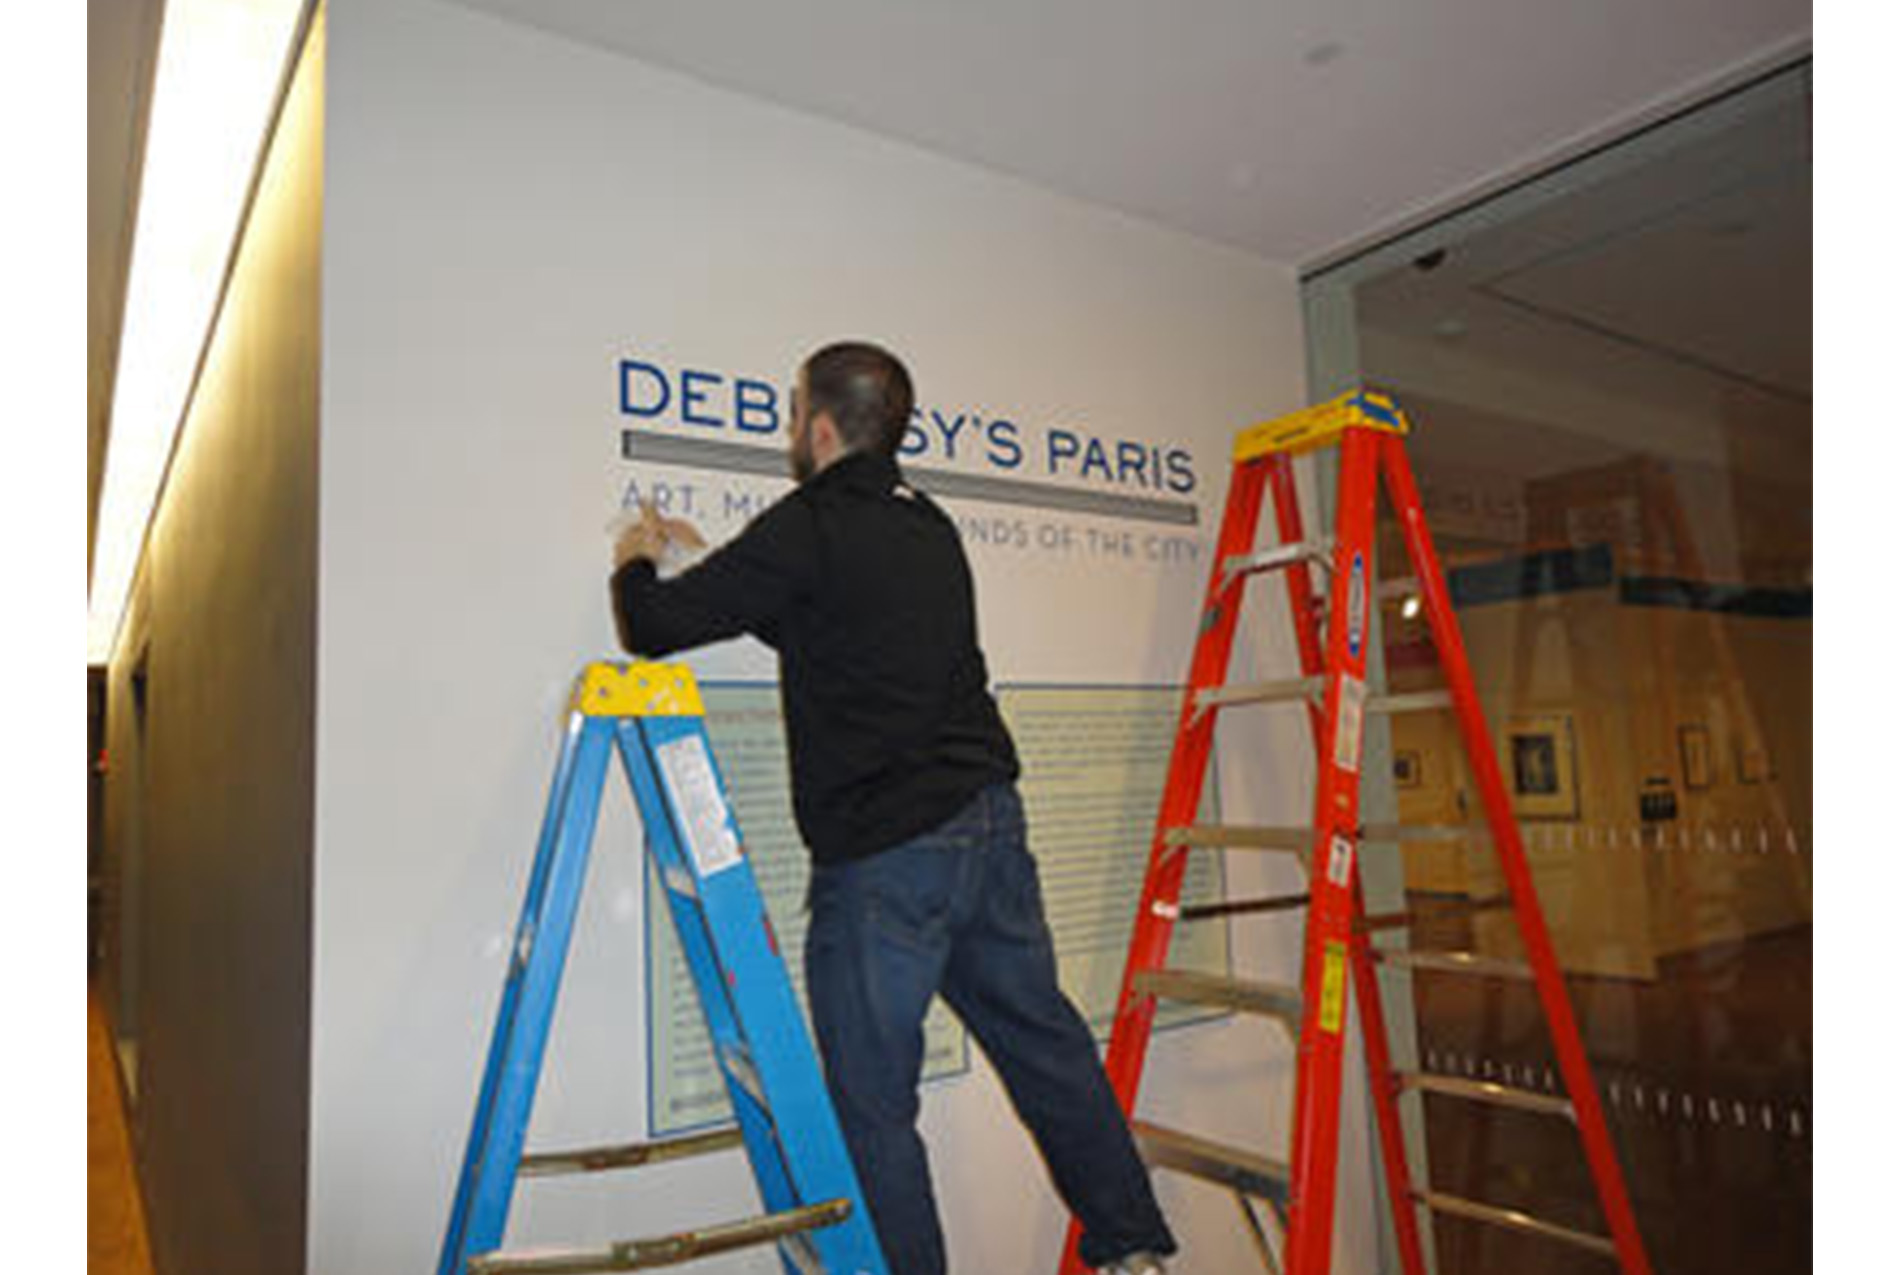 man stands on two ladders, one blue and one orange, installing text onto a wall display. text reads, "DEBUSSY'S PARIS: ART, MUSIC, AND THE SOUNDS OF THE CITY"